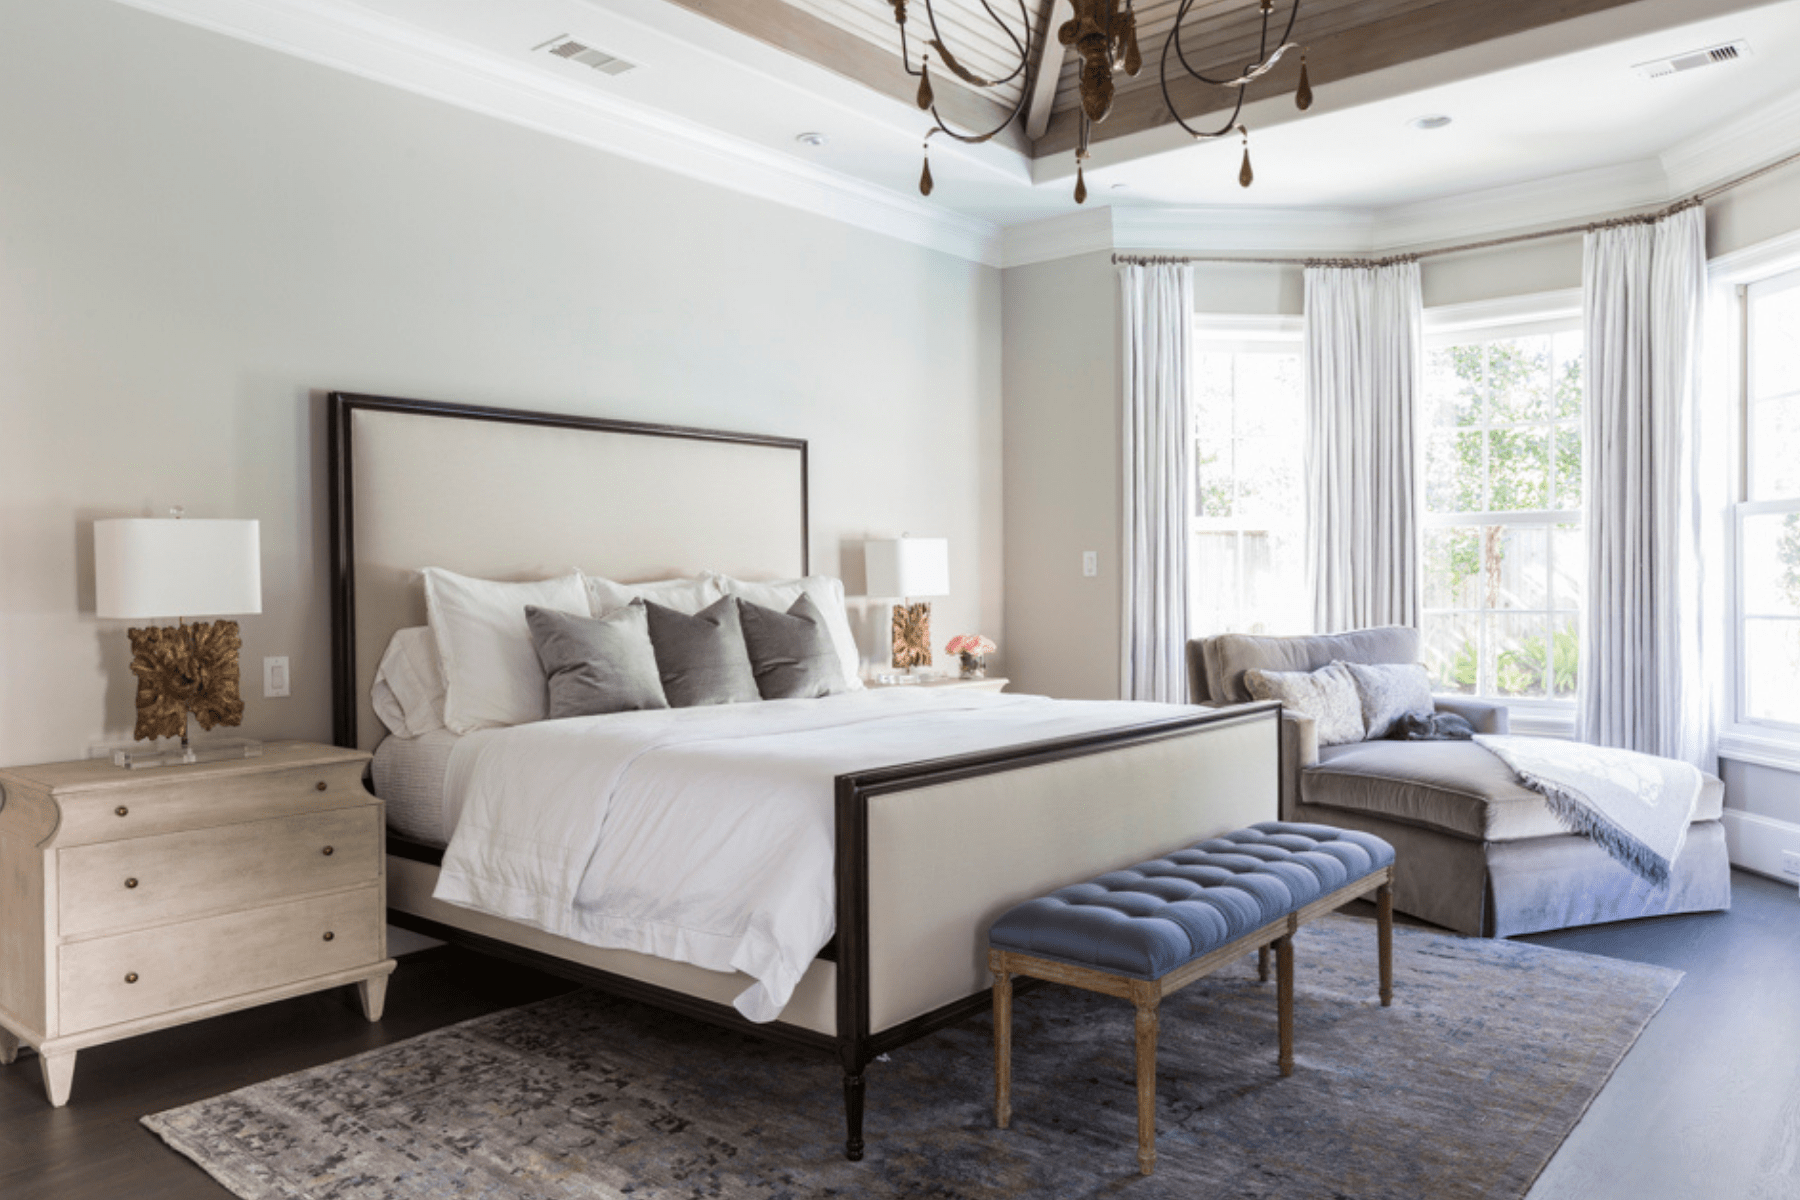 A view of the master bedroom in the Creekside Residence featuring soft palettes and textures to create a comforting space.